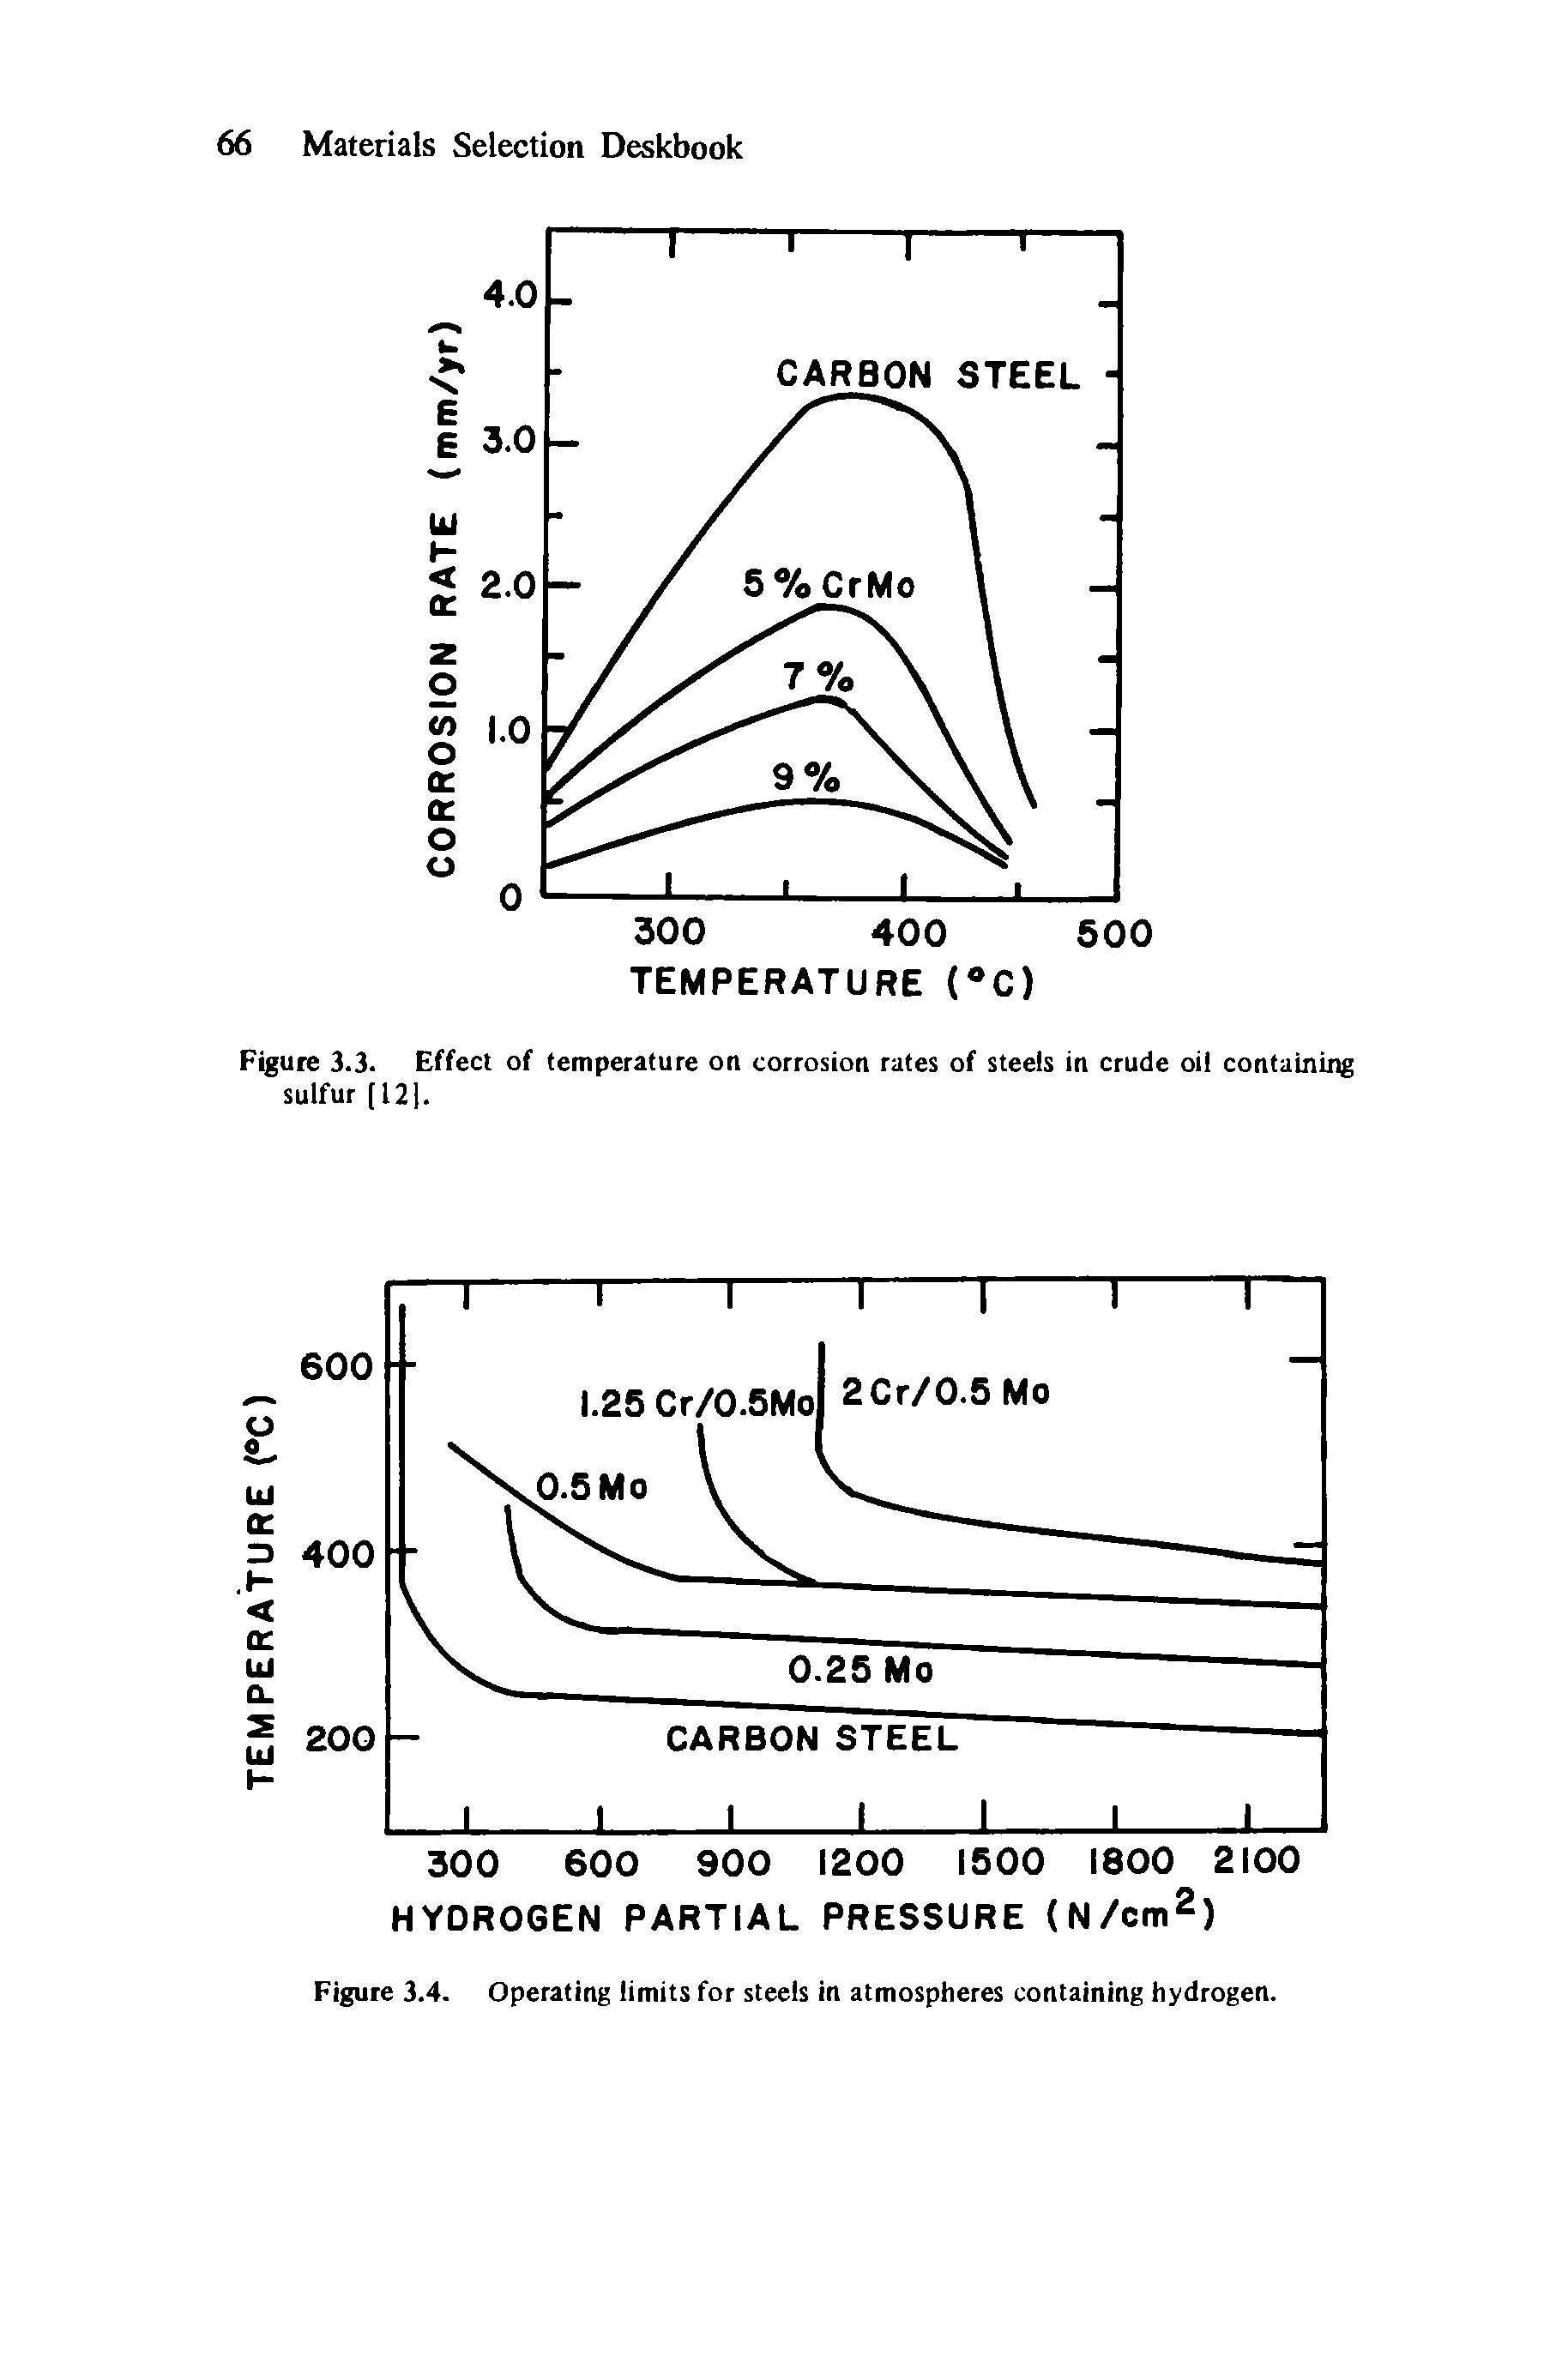 Figure 3.3. Effect of temperature on corrosion rates of steels in crude oil containing sulfur [121.